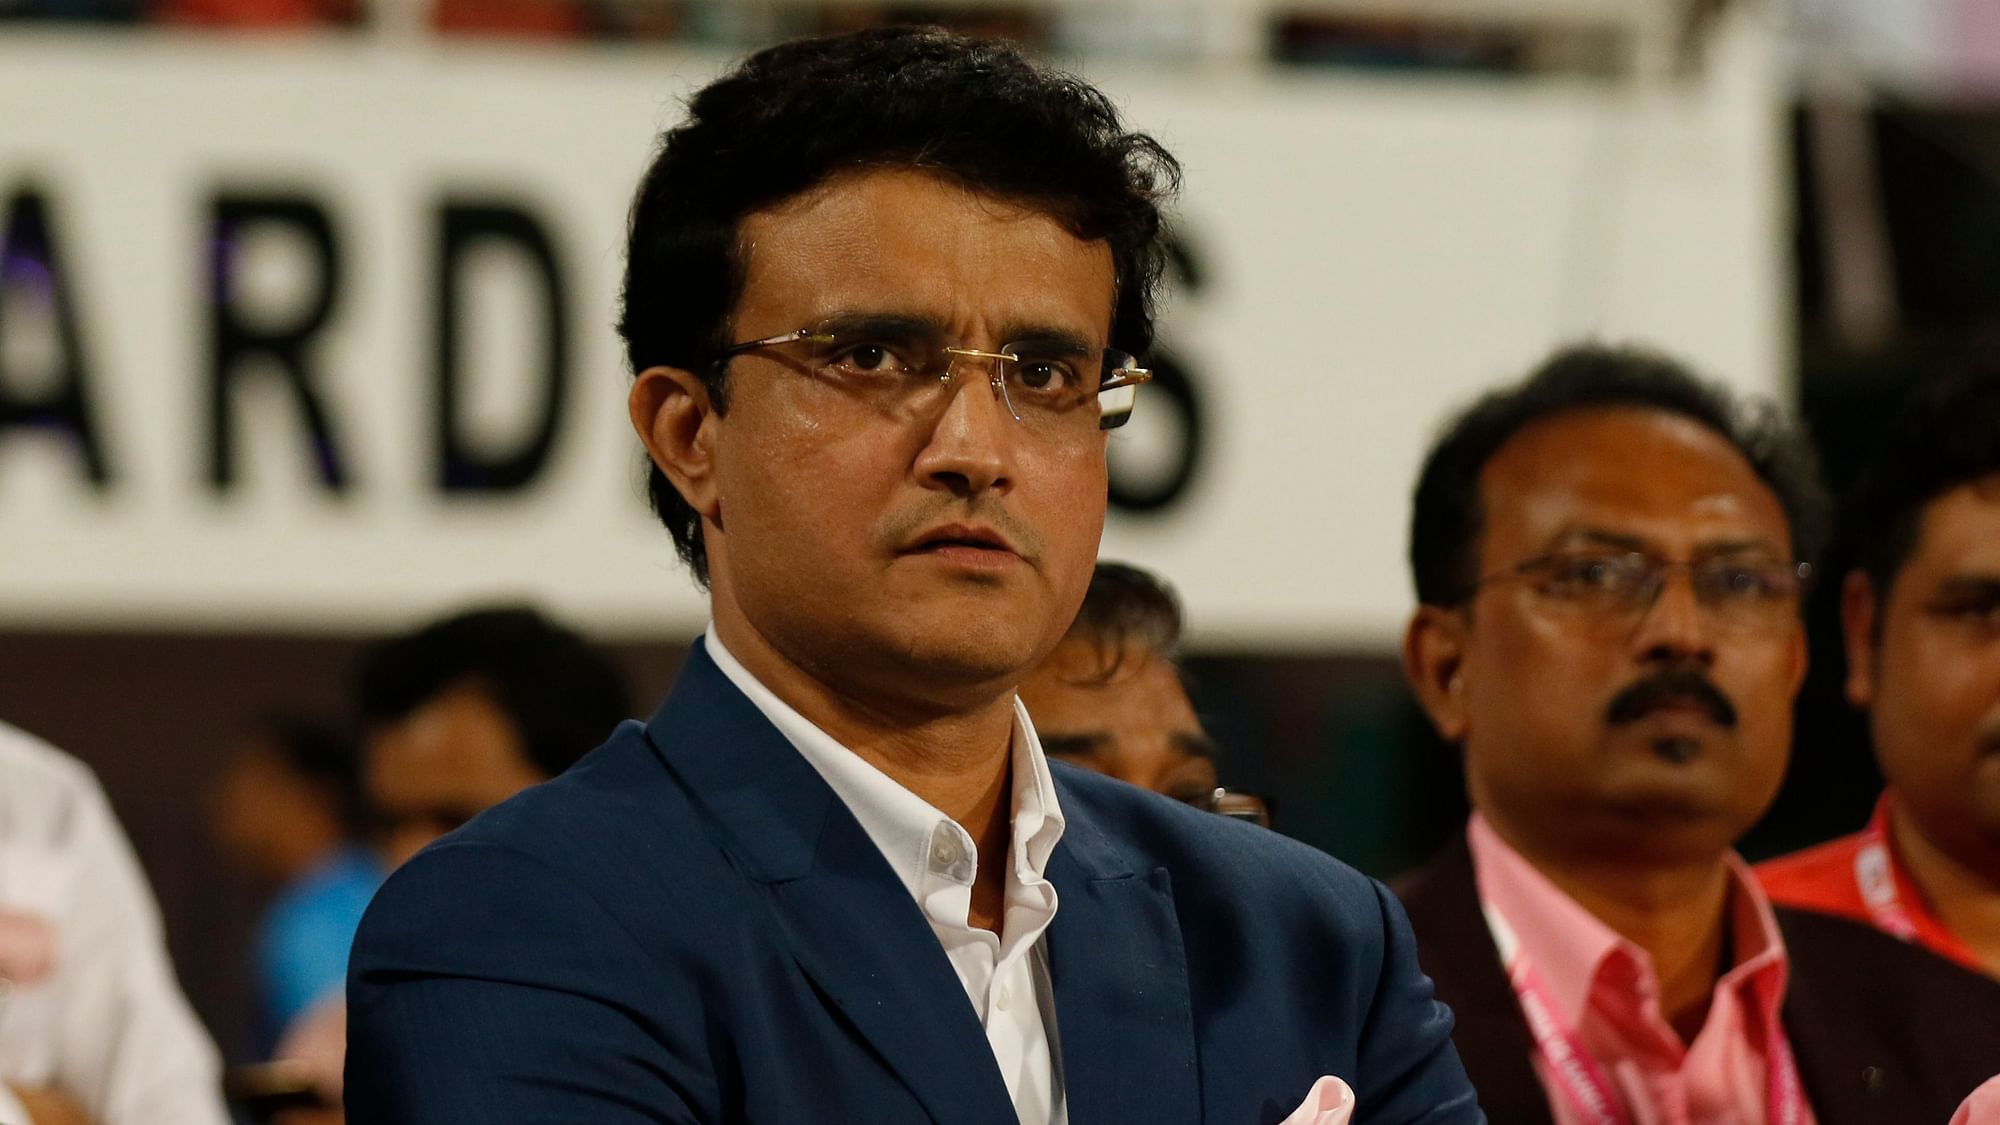 Immediately after taking over, just on a whim, Ganguly decided on the Kolkata Test being the Pink Ball Test, India’s first ever